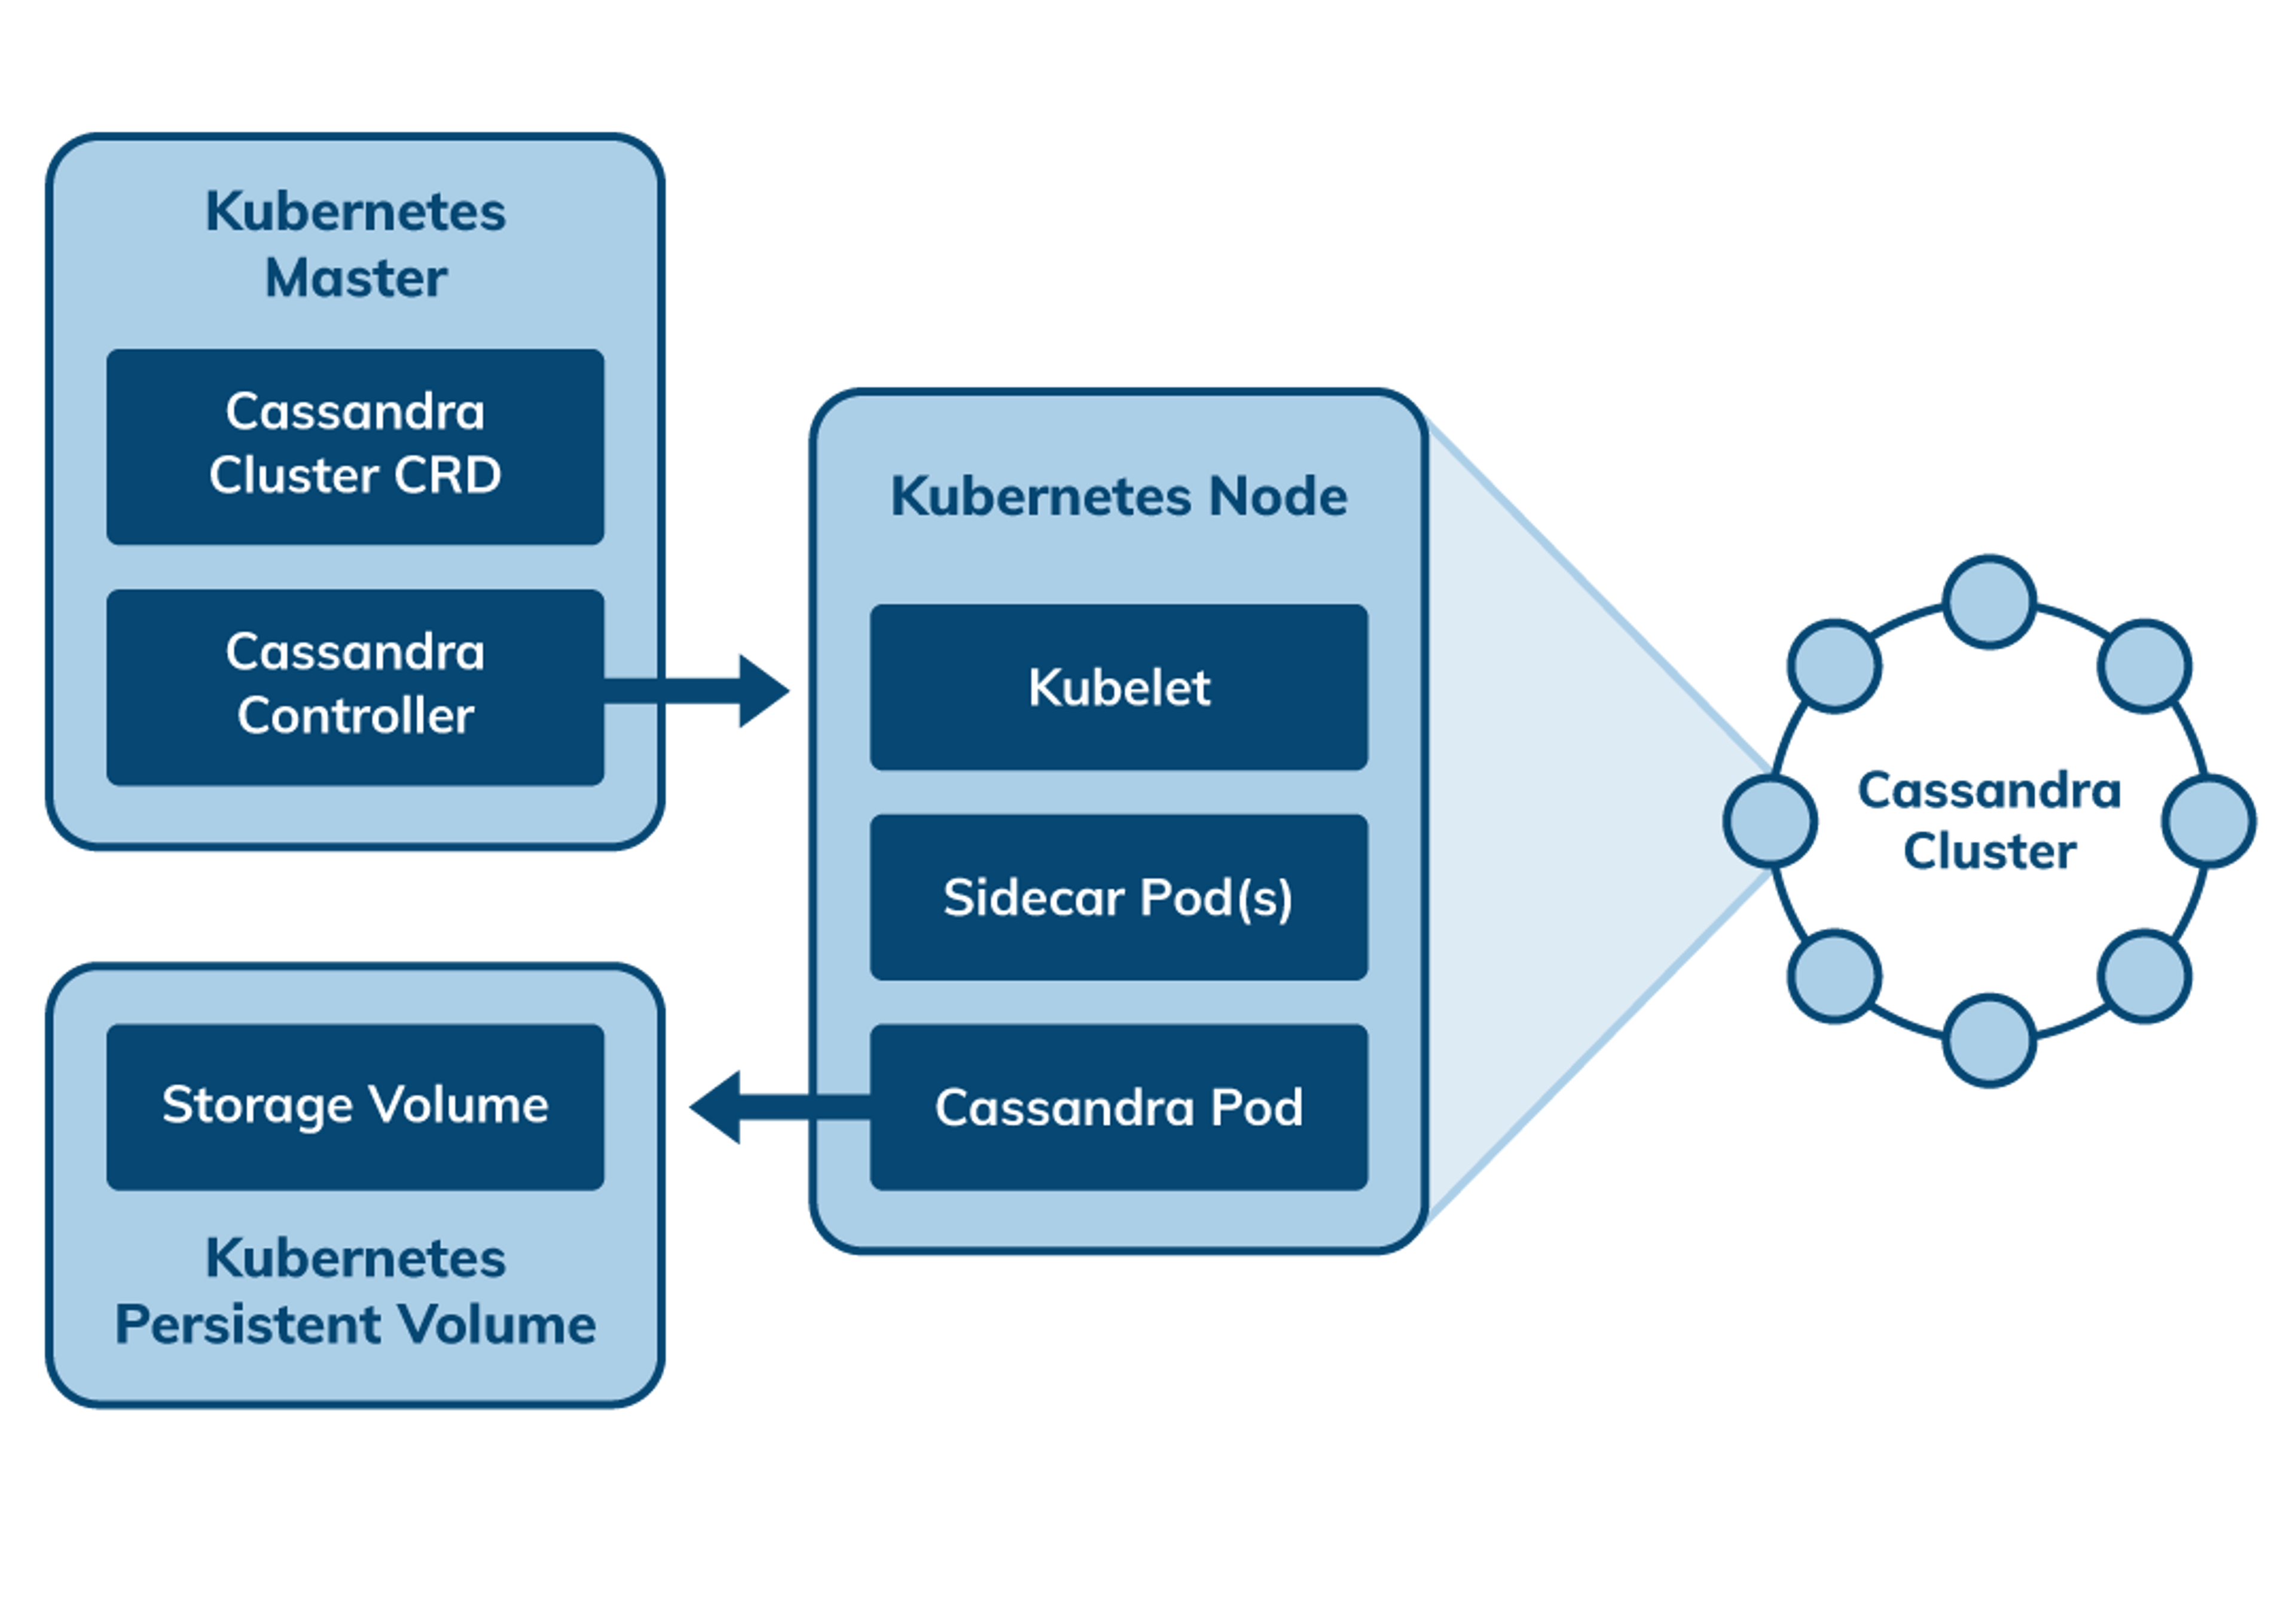 How to use Kubernetes with Cassandra